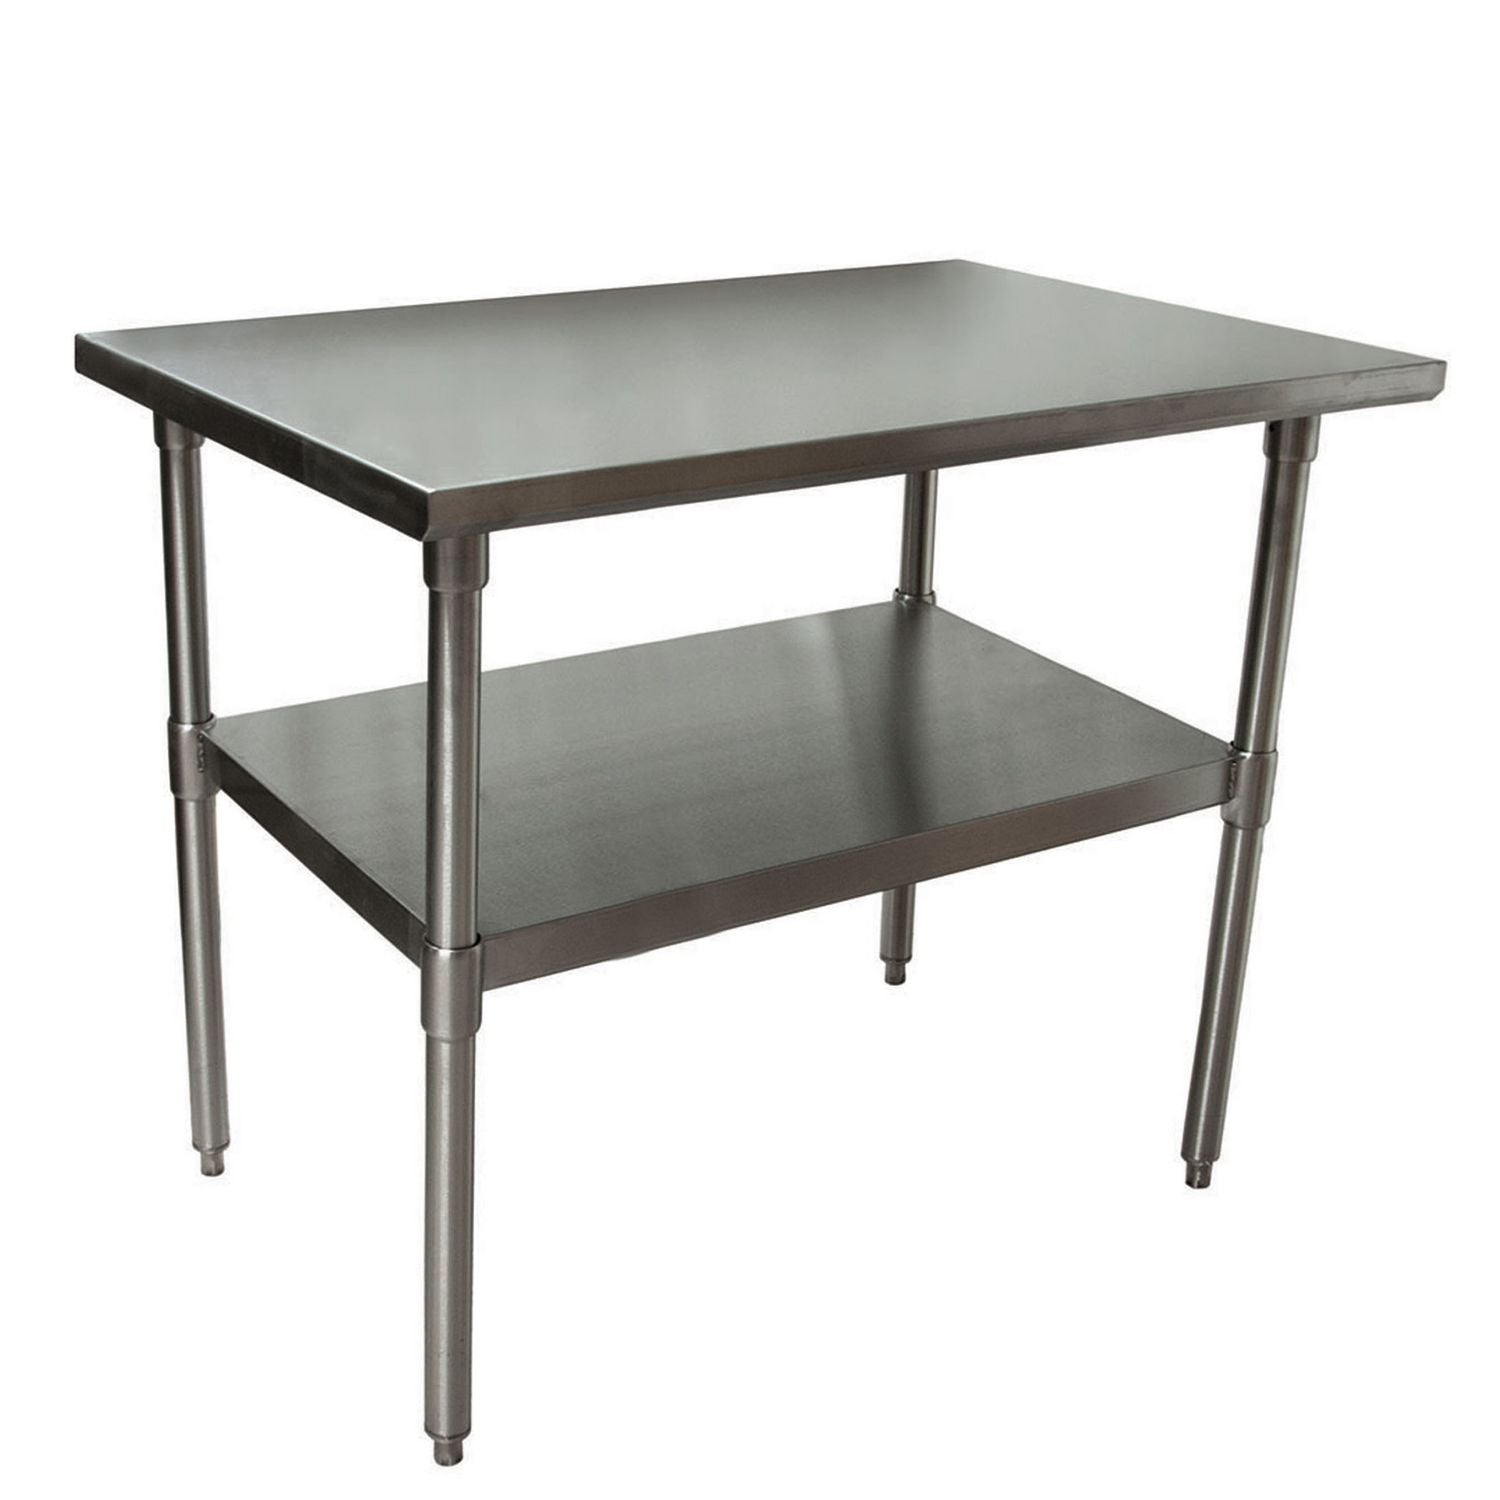 Stainless Steel Flat Top Work Tables, 48w x 24d x 36h, Silver, 2/Pallet, Ships in 4-6 Business Days - 1